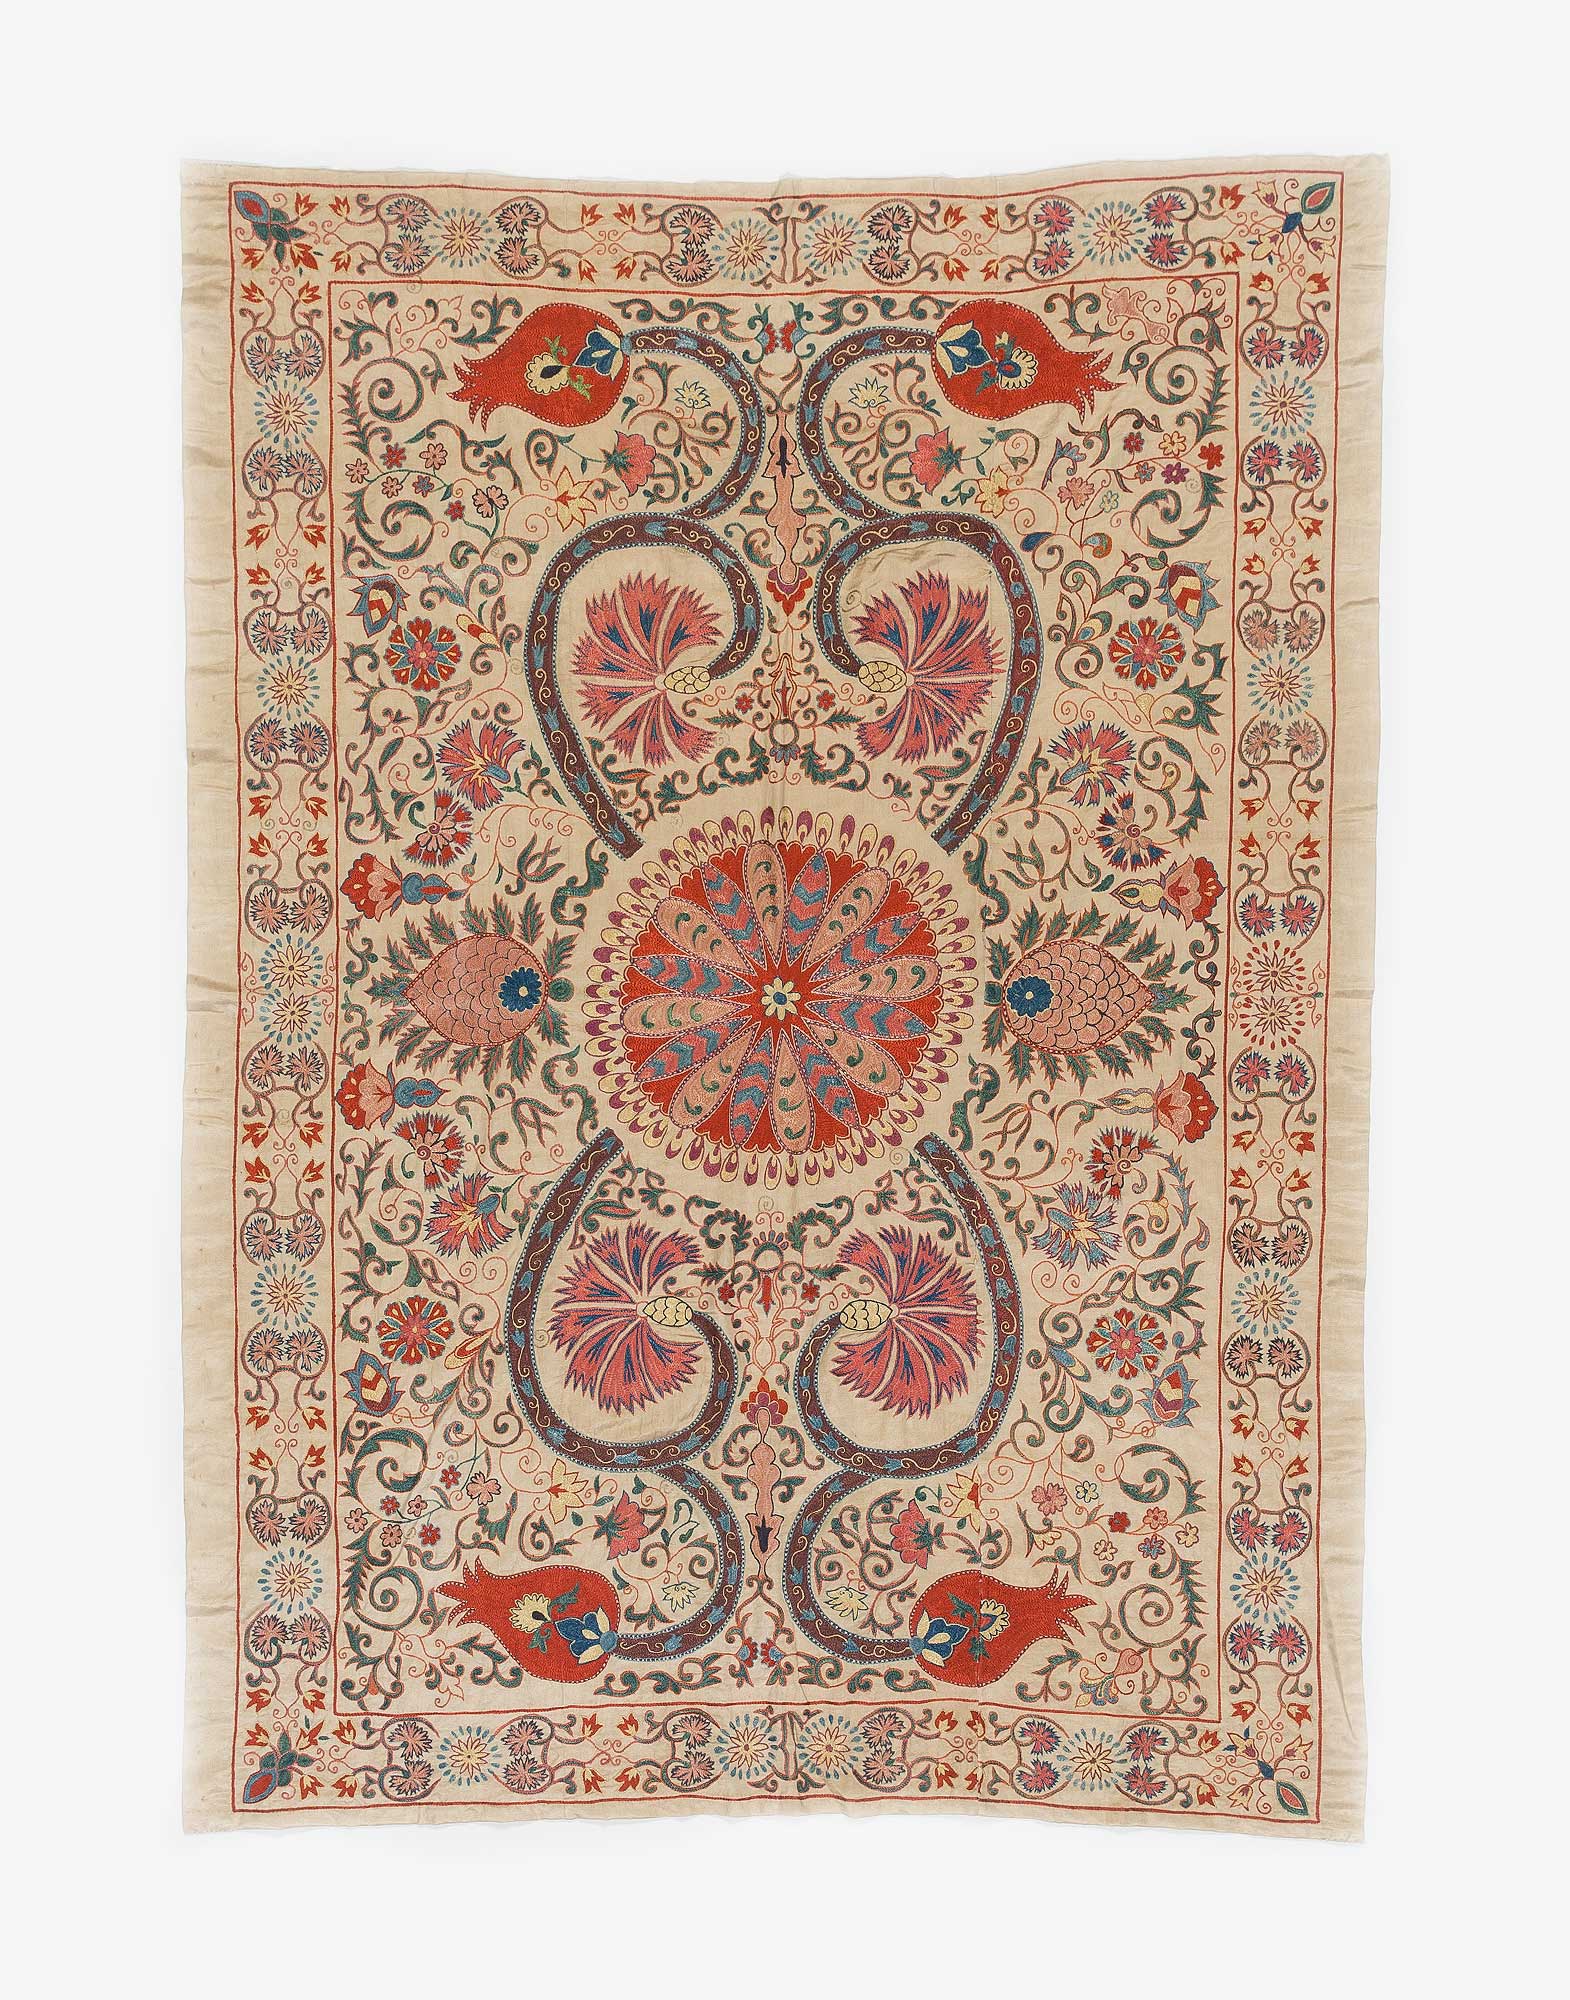 Uzbek Suzani Embroidered Silk Bed Cover